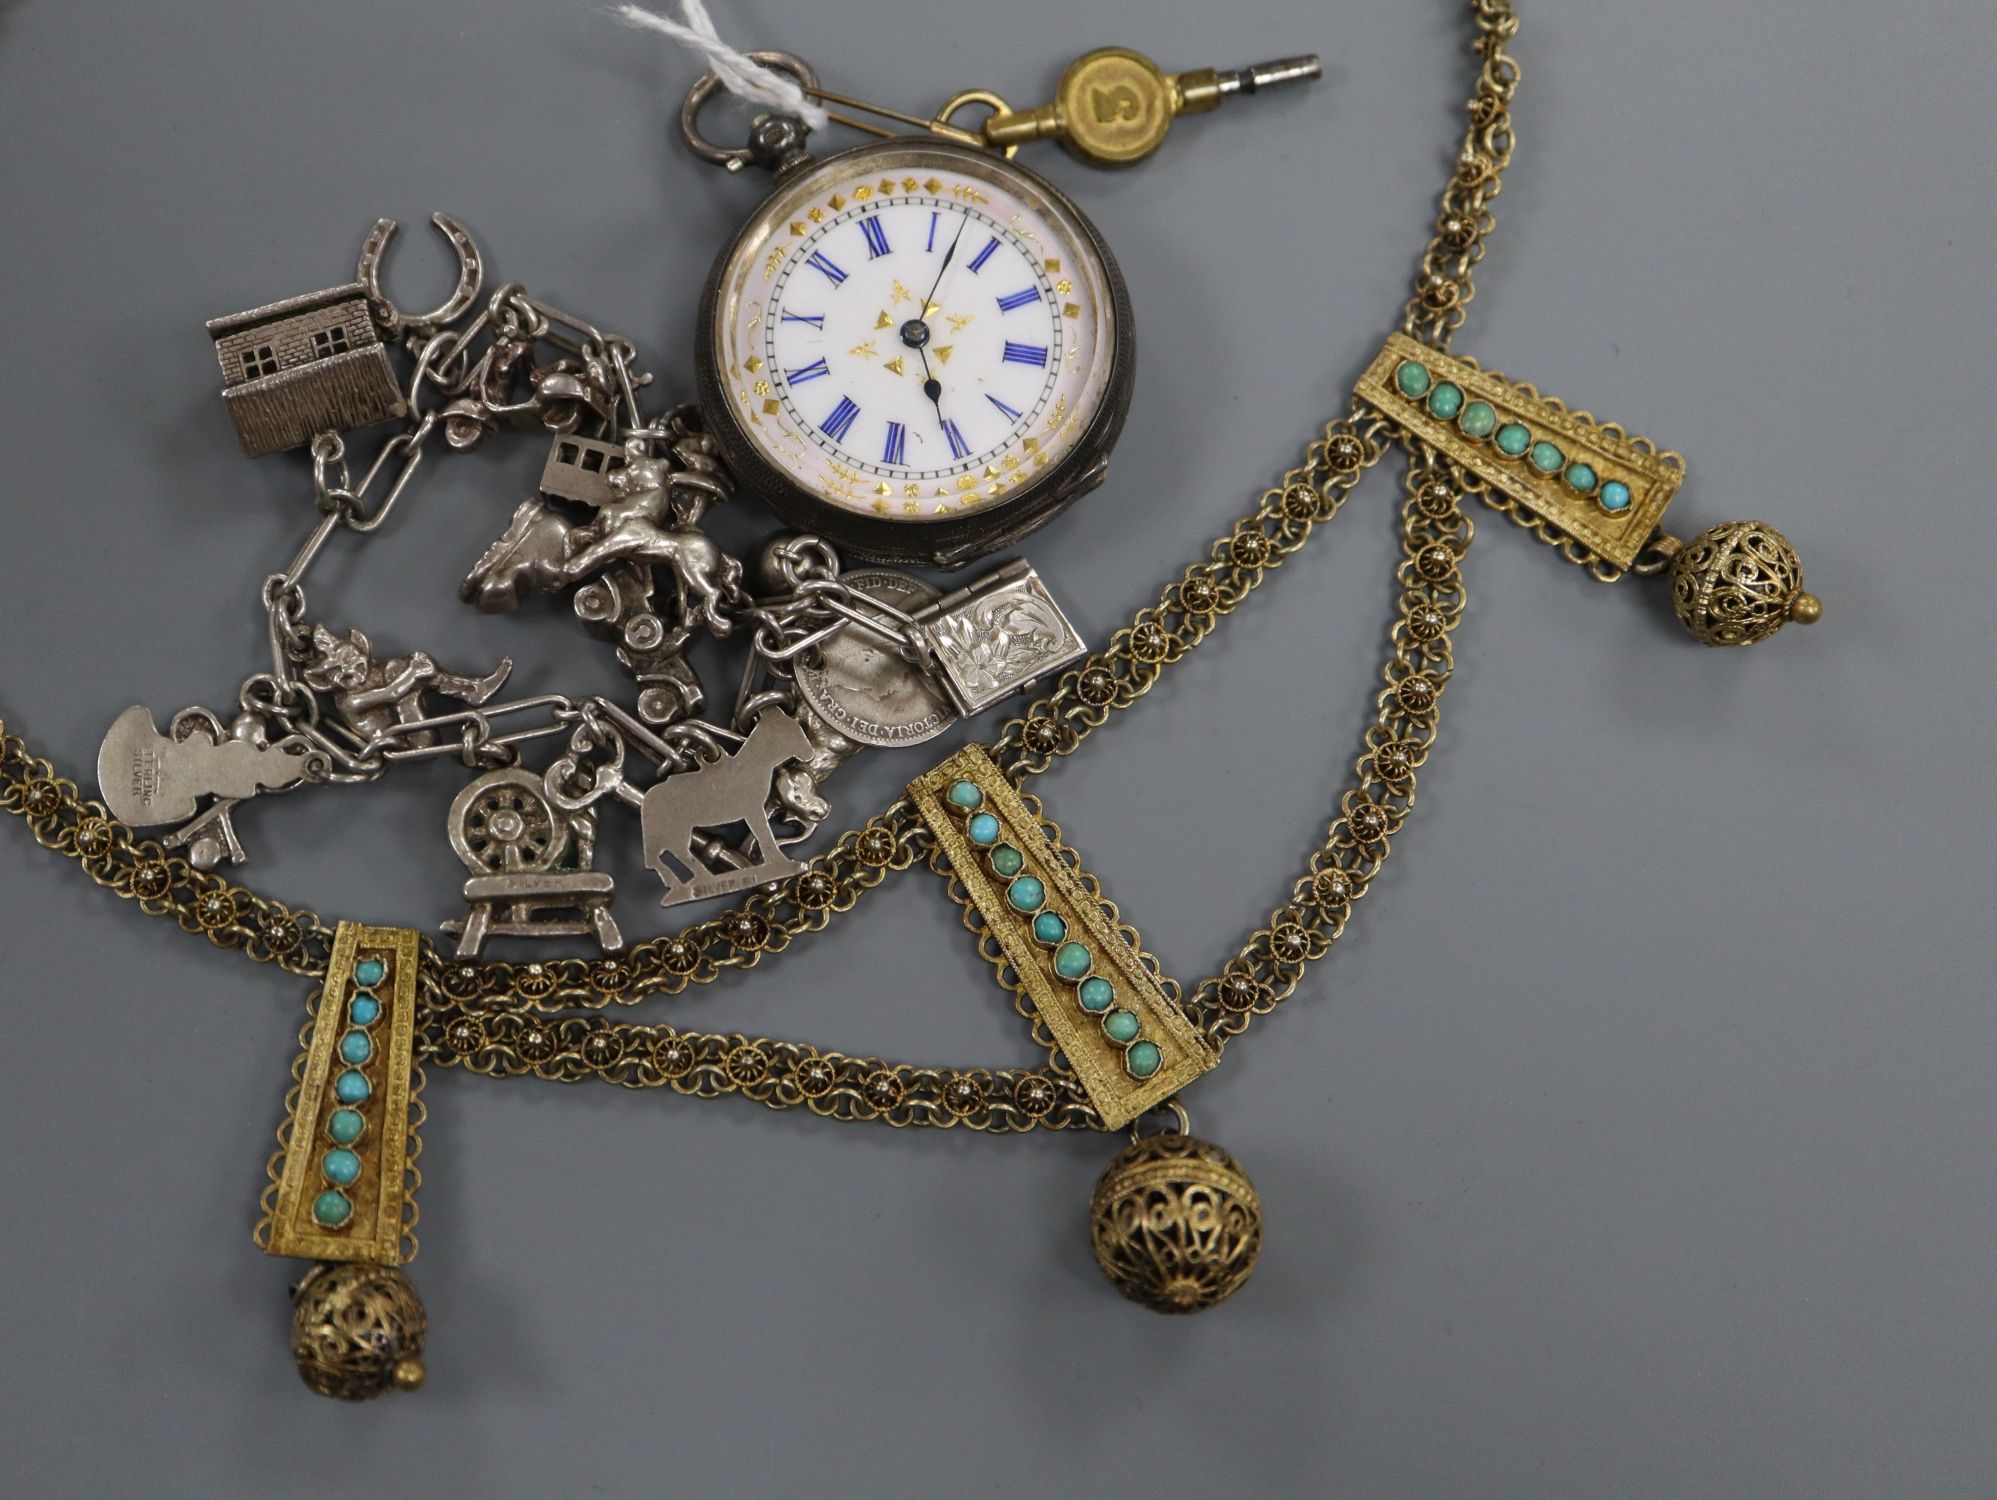 A ladys' silver open face fob watch, a silver charm bracelet and an Eastern plated turquoise-set